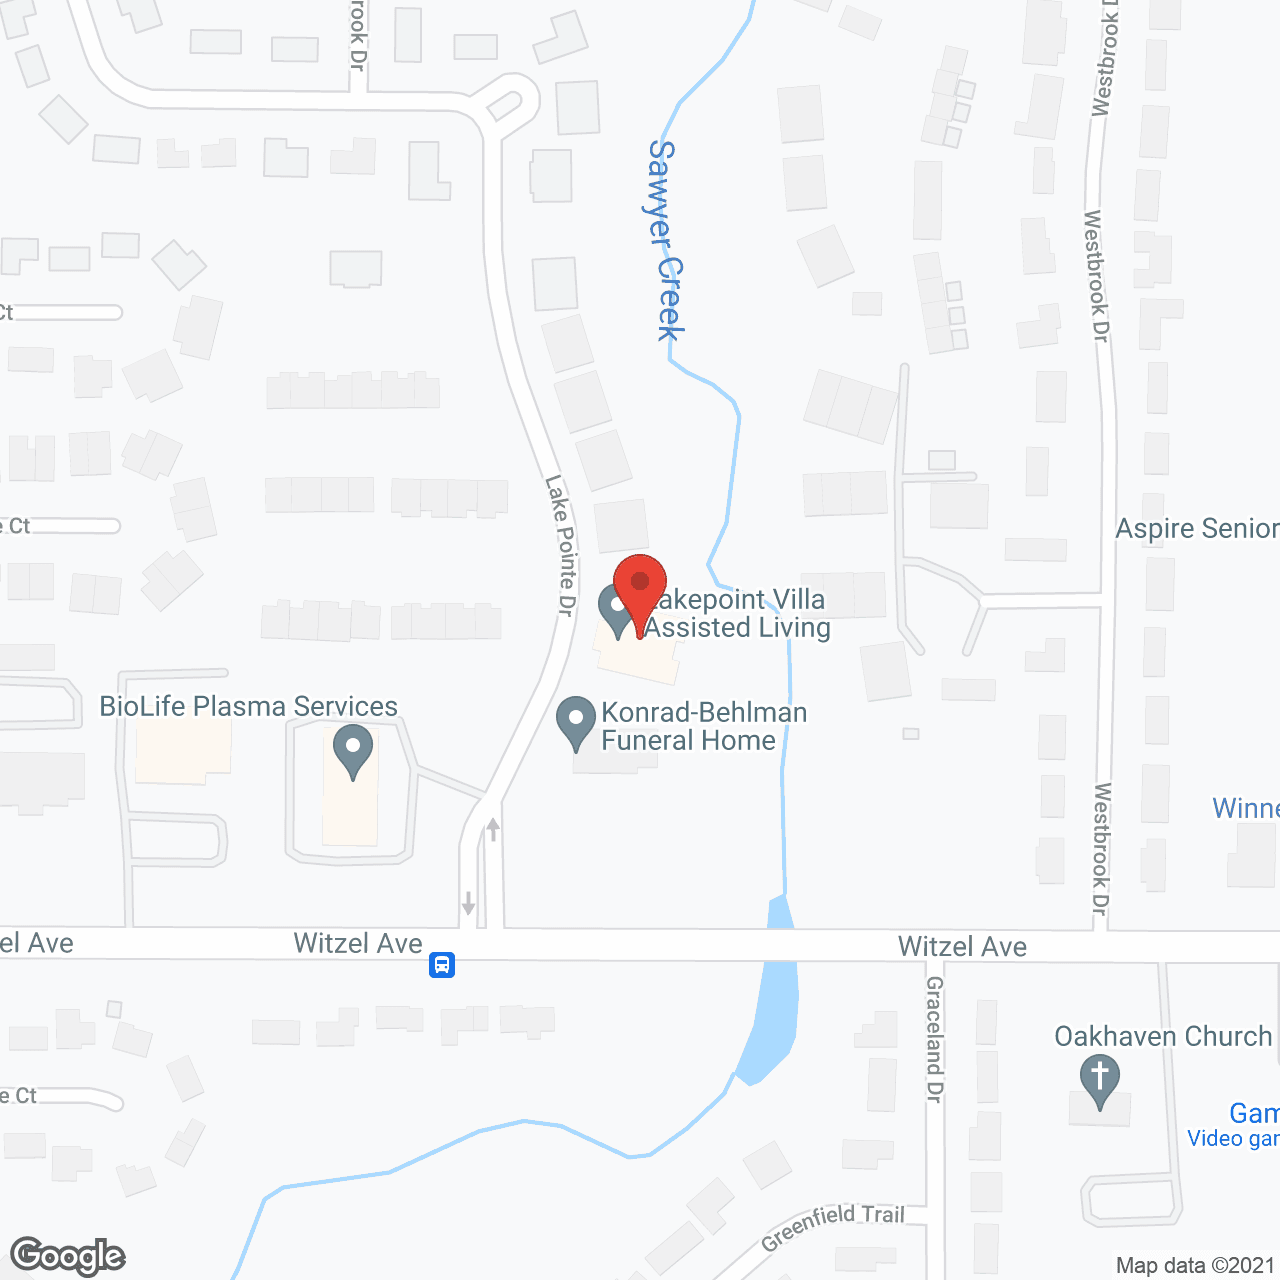 Lake Pointe Villa Assisted Living in google map